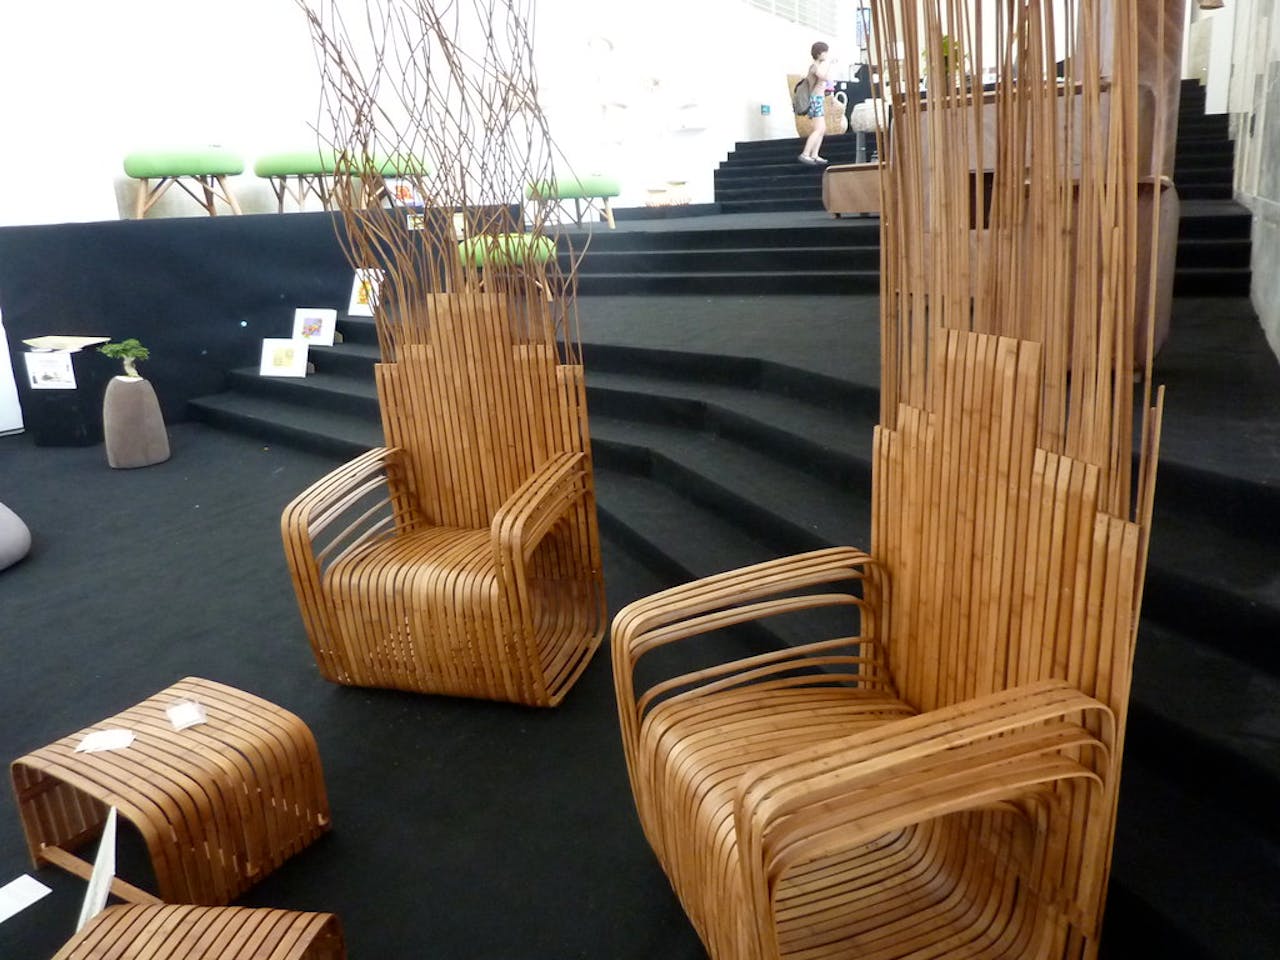 What's holding back China's bamboo furniture makers? | News | Eco